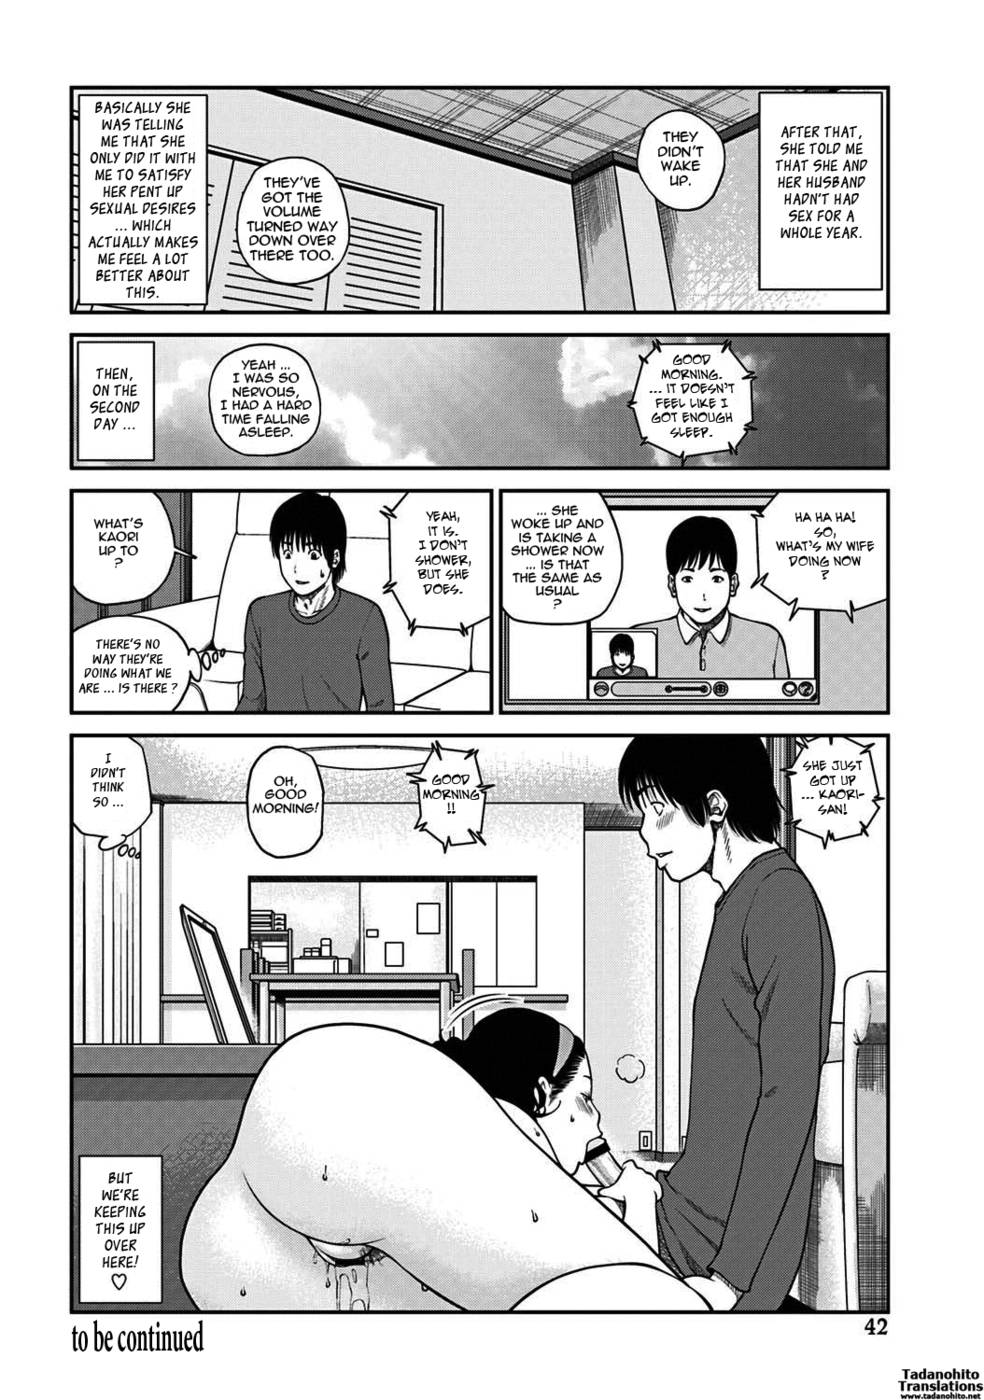 33 Year Old Unsatisfied Wife-Chapter 2-Spouse Swapping-First Night-Hentai Manga Hentai Comic picture